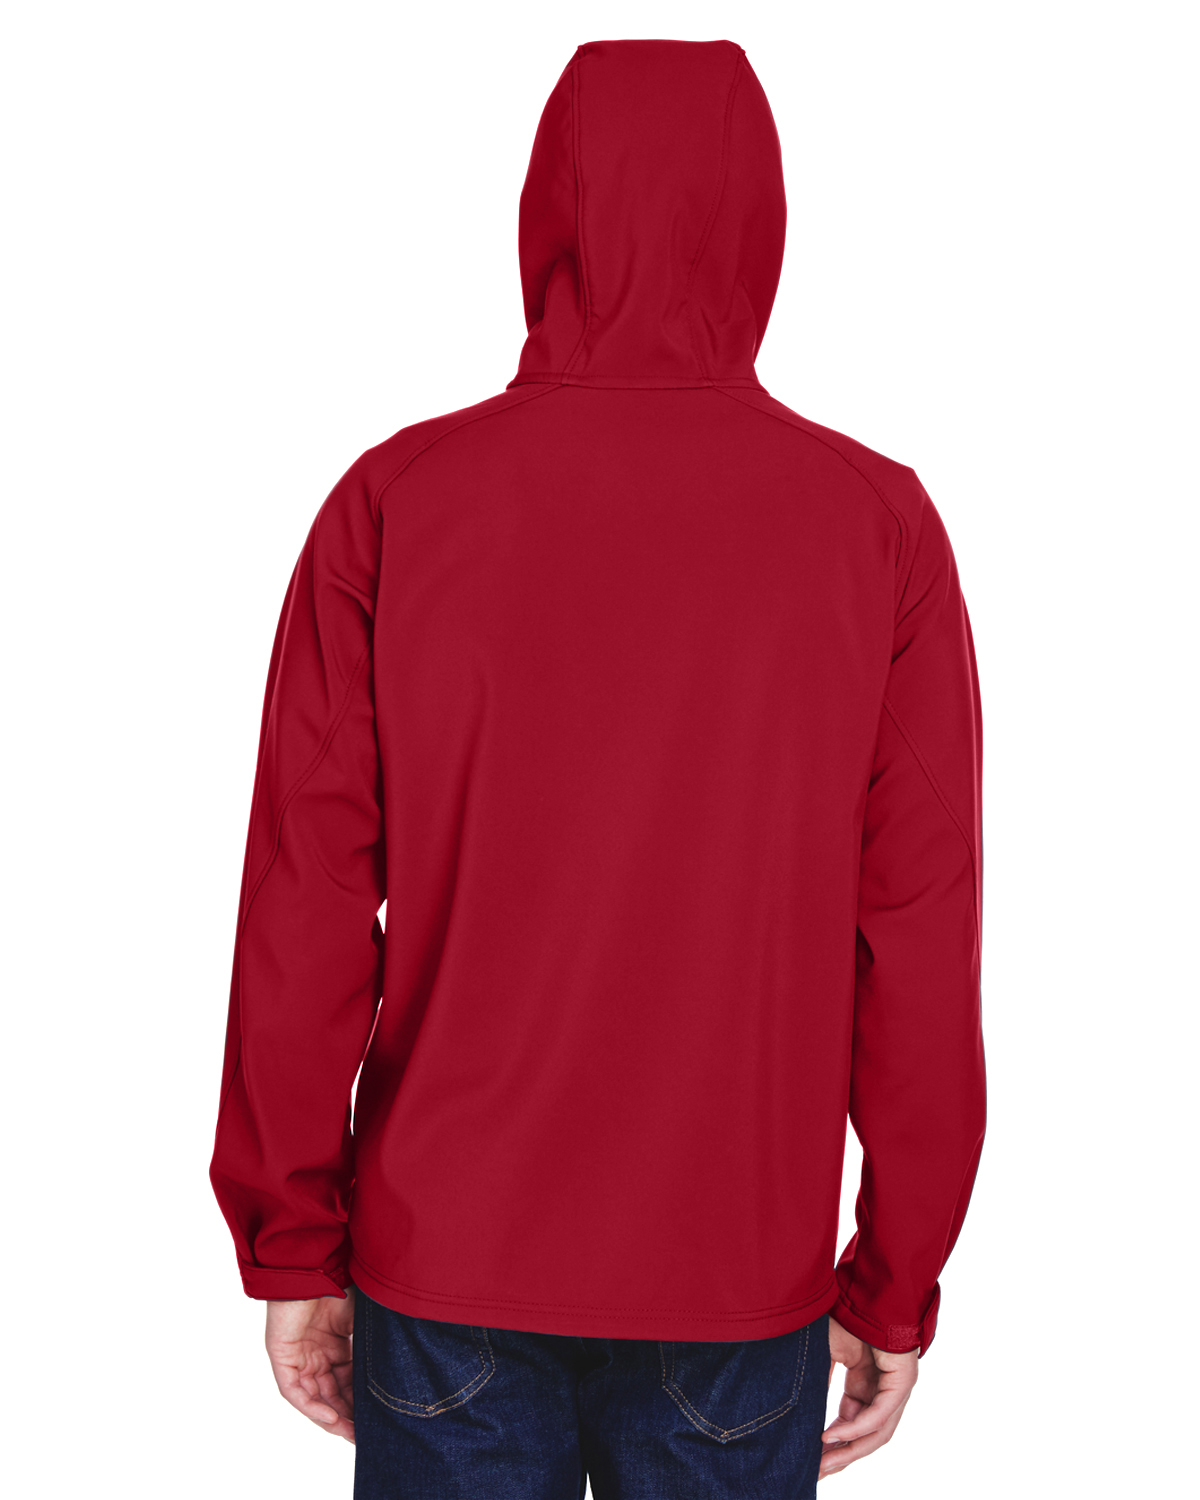 Men's Prospect Two-Layer Fleece Bonded Soft Shell Hooded Jacket - MOLTEN RED - XL - image 2 of 3